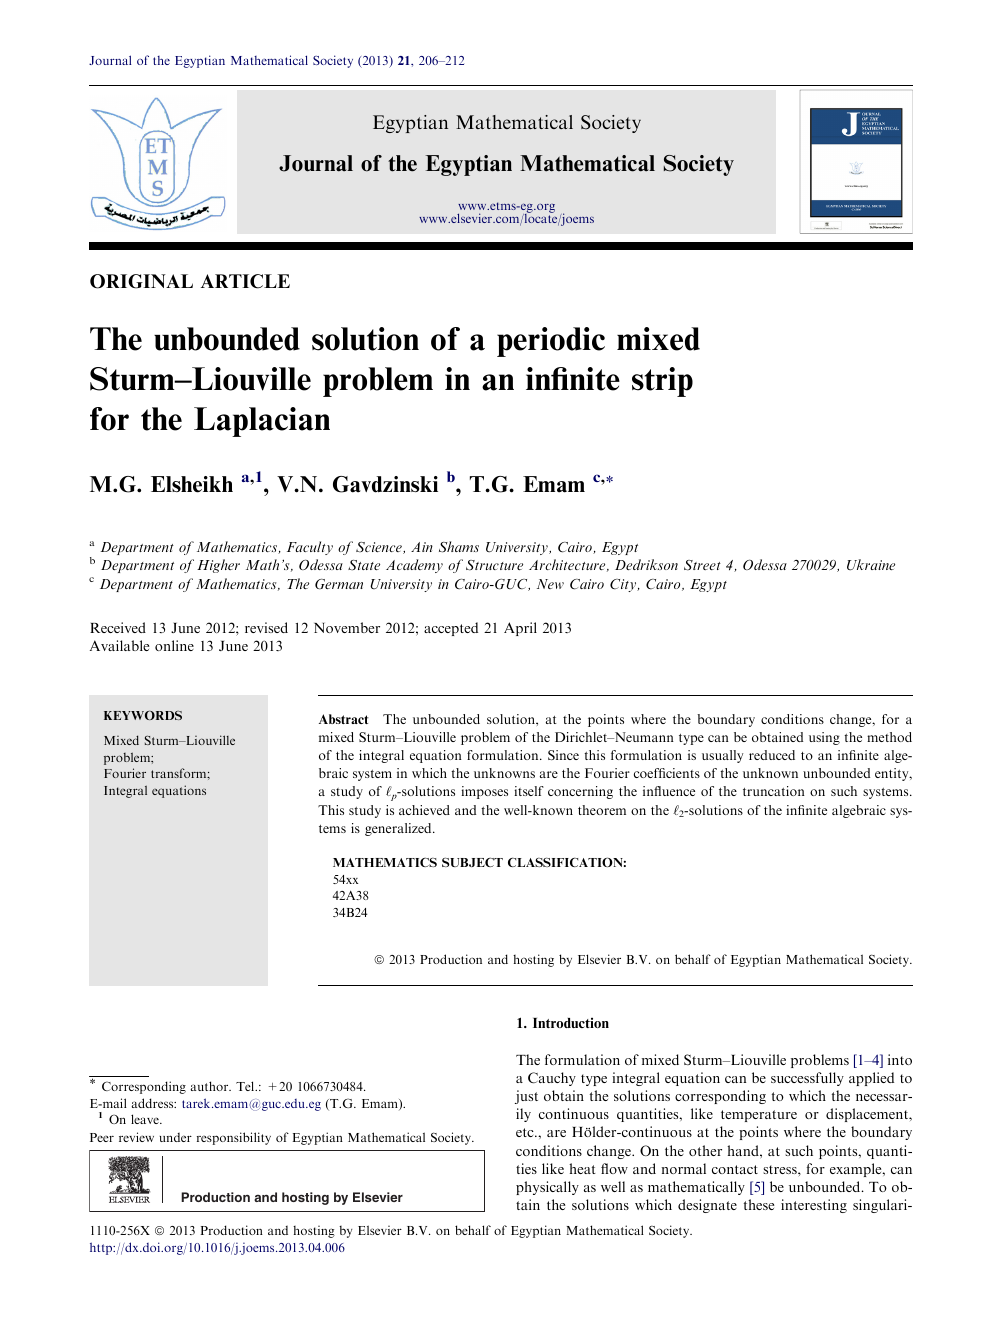 The Unbounded Solution Of A Periodic Mixed Sturm Liouville Problem In An Infinite Strip For The Laplacian Topic Of Research Paper In Mathematics Download Scholarly Article Pdf And Read For Free On